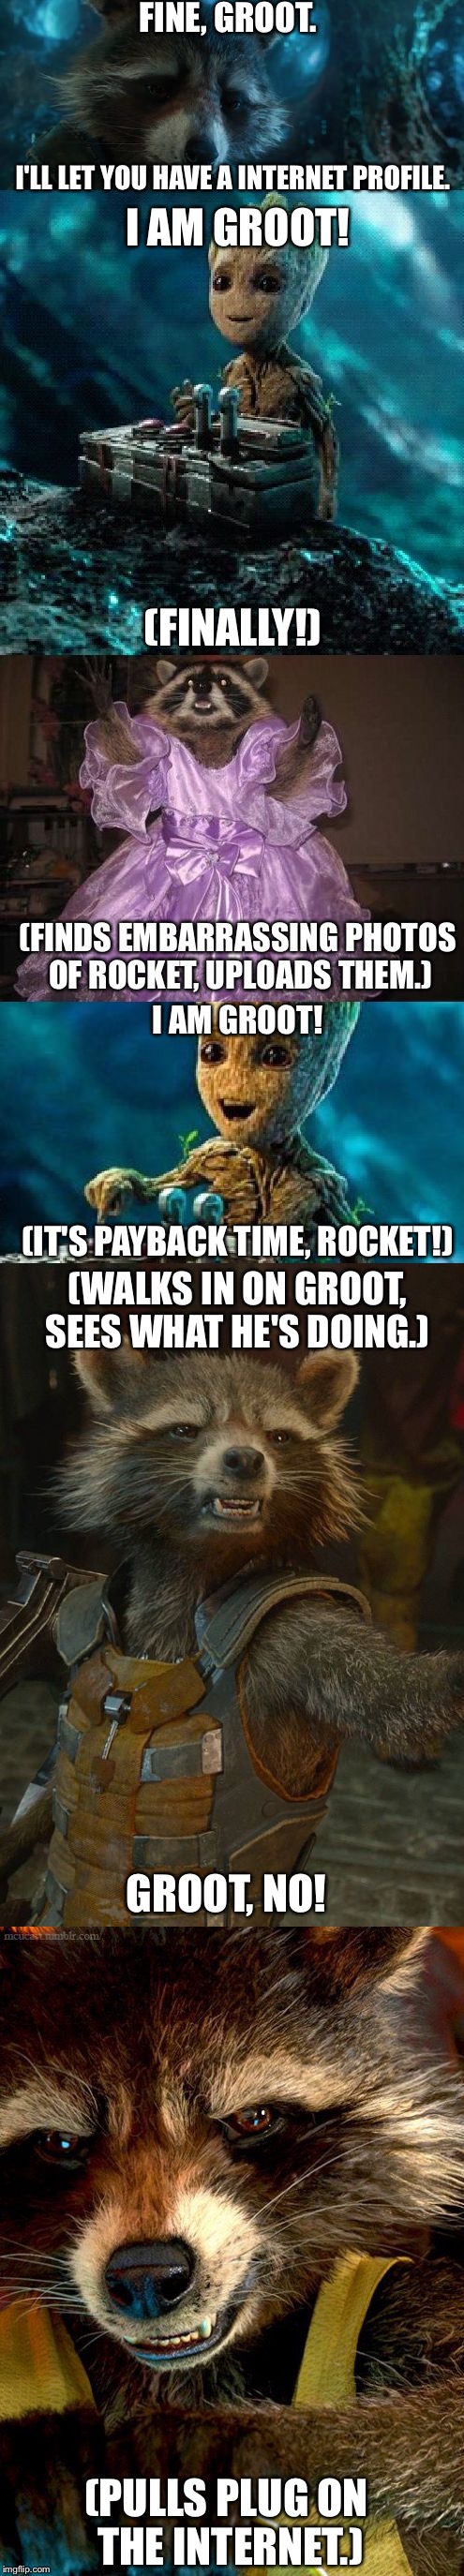 Groot's Internet Adventures  | FINE, GROOT. I'LL LET YOU HAVE A INTERNET PROFILE. I AM GROOT! (FINALLY!); (FINDS EMBARRASSING PHOTOS OF ROCKET, UPLOADS THEM.); I AM GROOT! (IT'S PAYBACK TIME, ROCKET!); (WALKS IN ON GROOT, SEES WHAT HE'S DOING.); GROOT, NO! (PULLS PLUG ON THE INTERNET.) | image tagged in rocket raccoon,groot,internet,memes | made w/ Imgflip meme maker